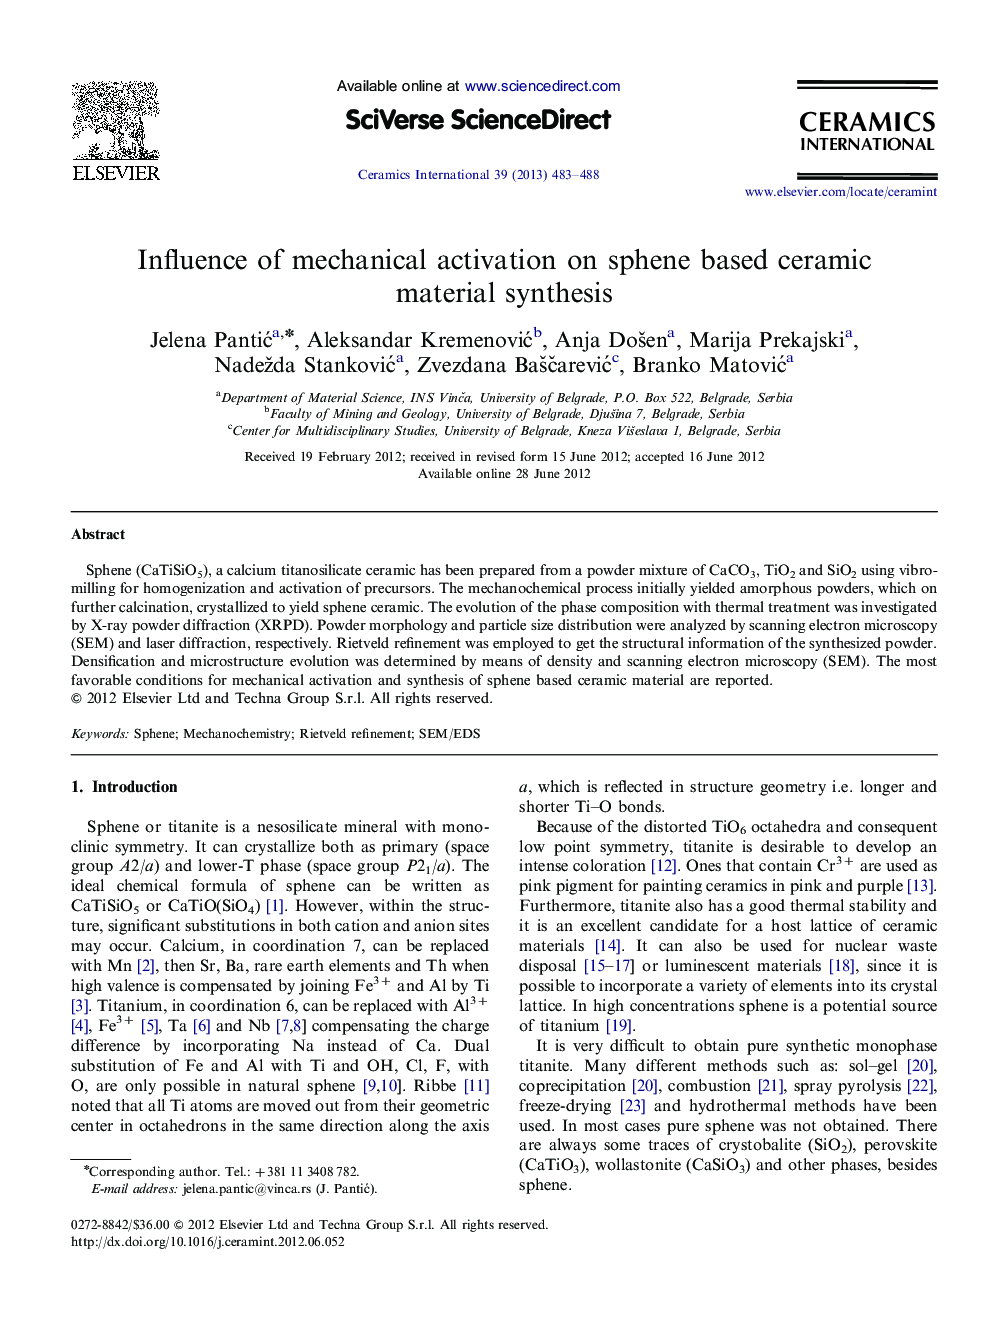 Influence of mechanical activation on sphene based ceramic material synthesis